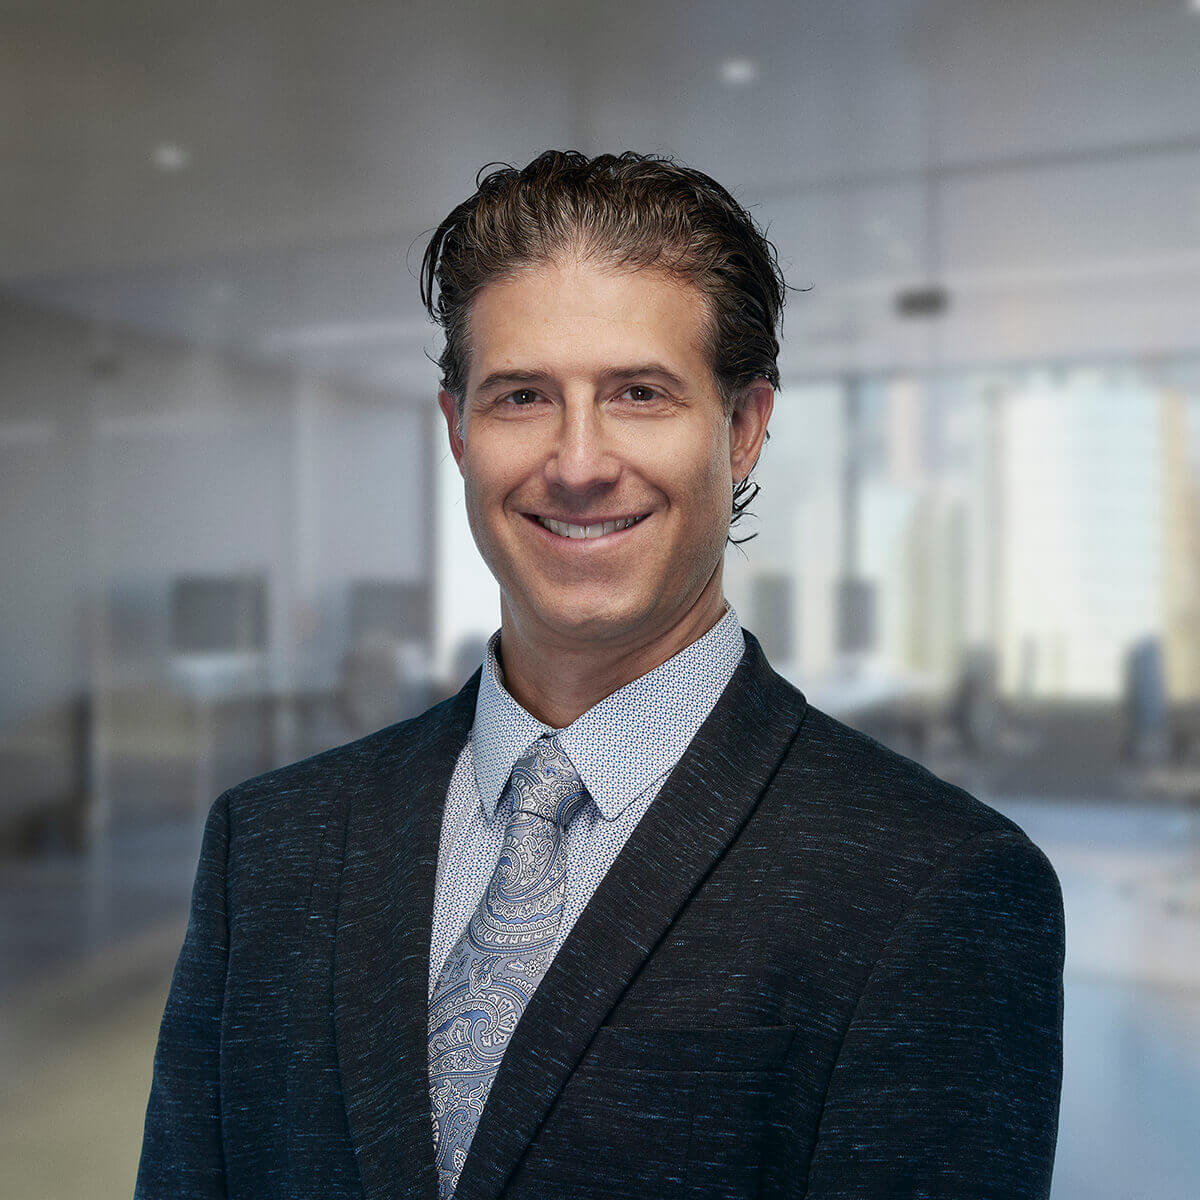 An image of Greg Newman, a principal and co-founder of Keystone Commercial Real Estate.